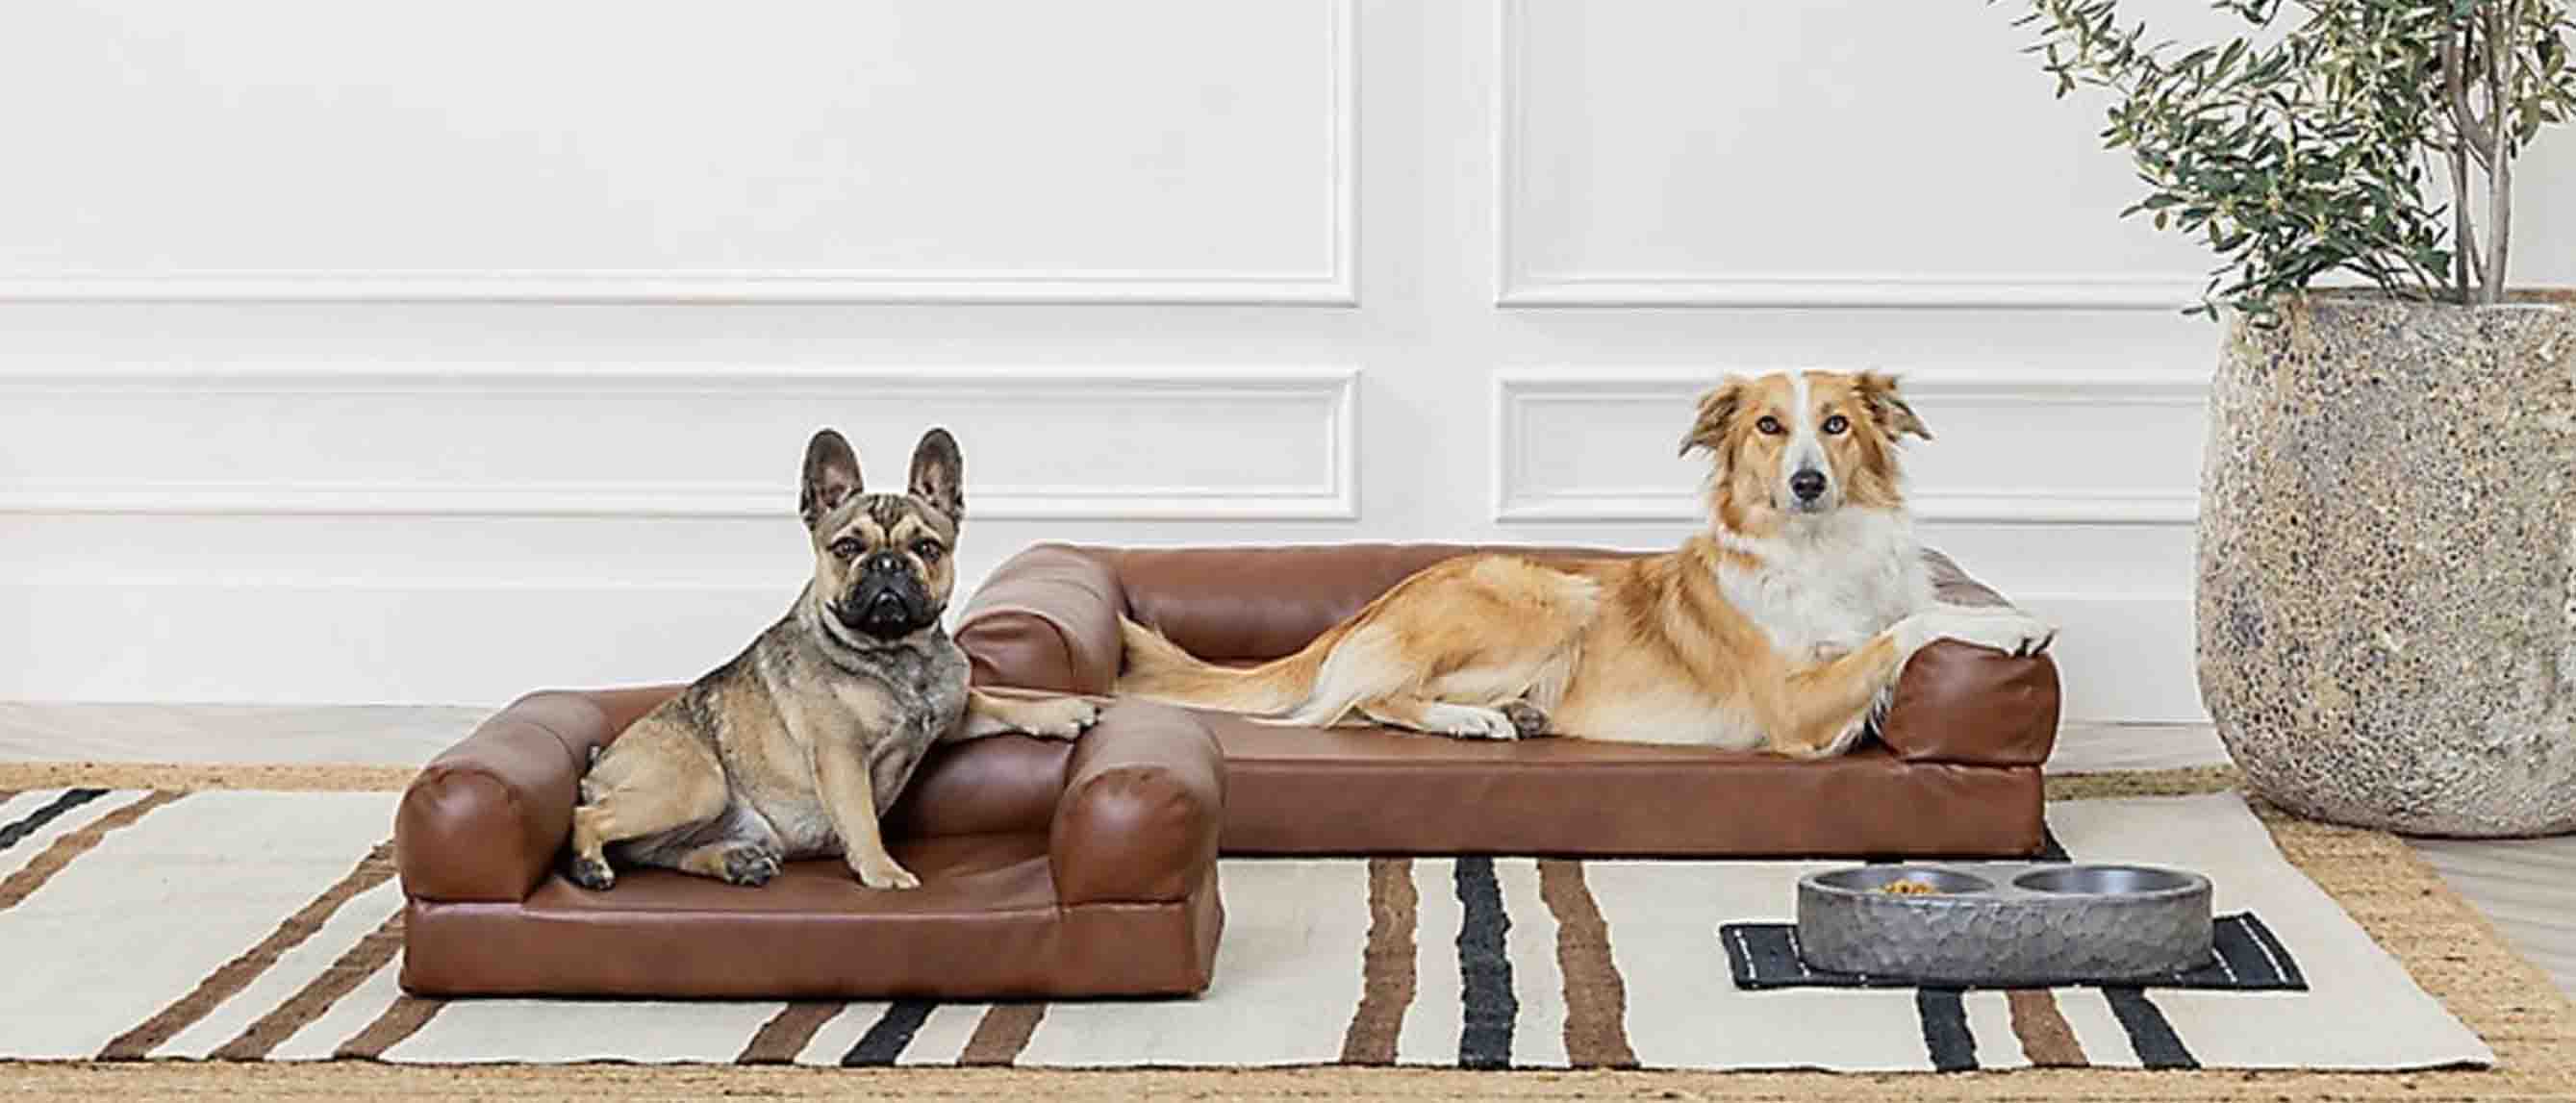 Two dogs on dog beds in living room